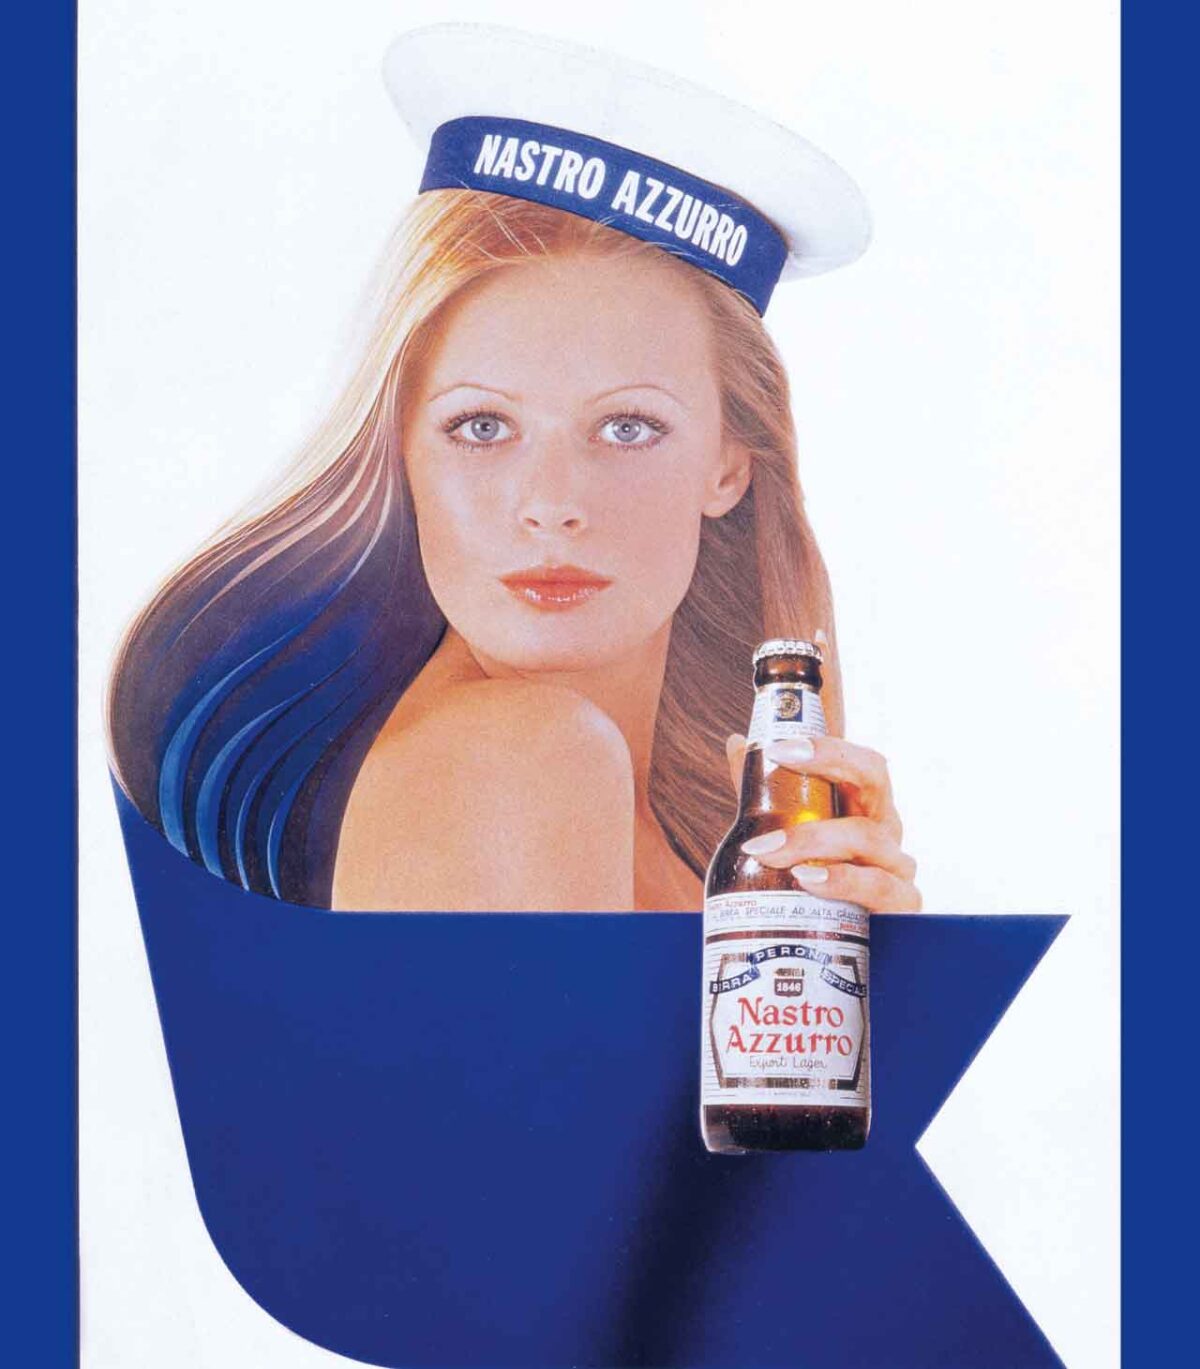 Peroni's campaign launch of "The National Blond".